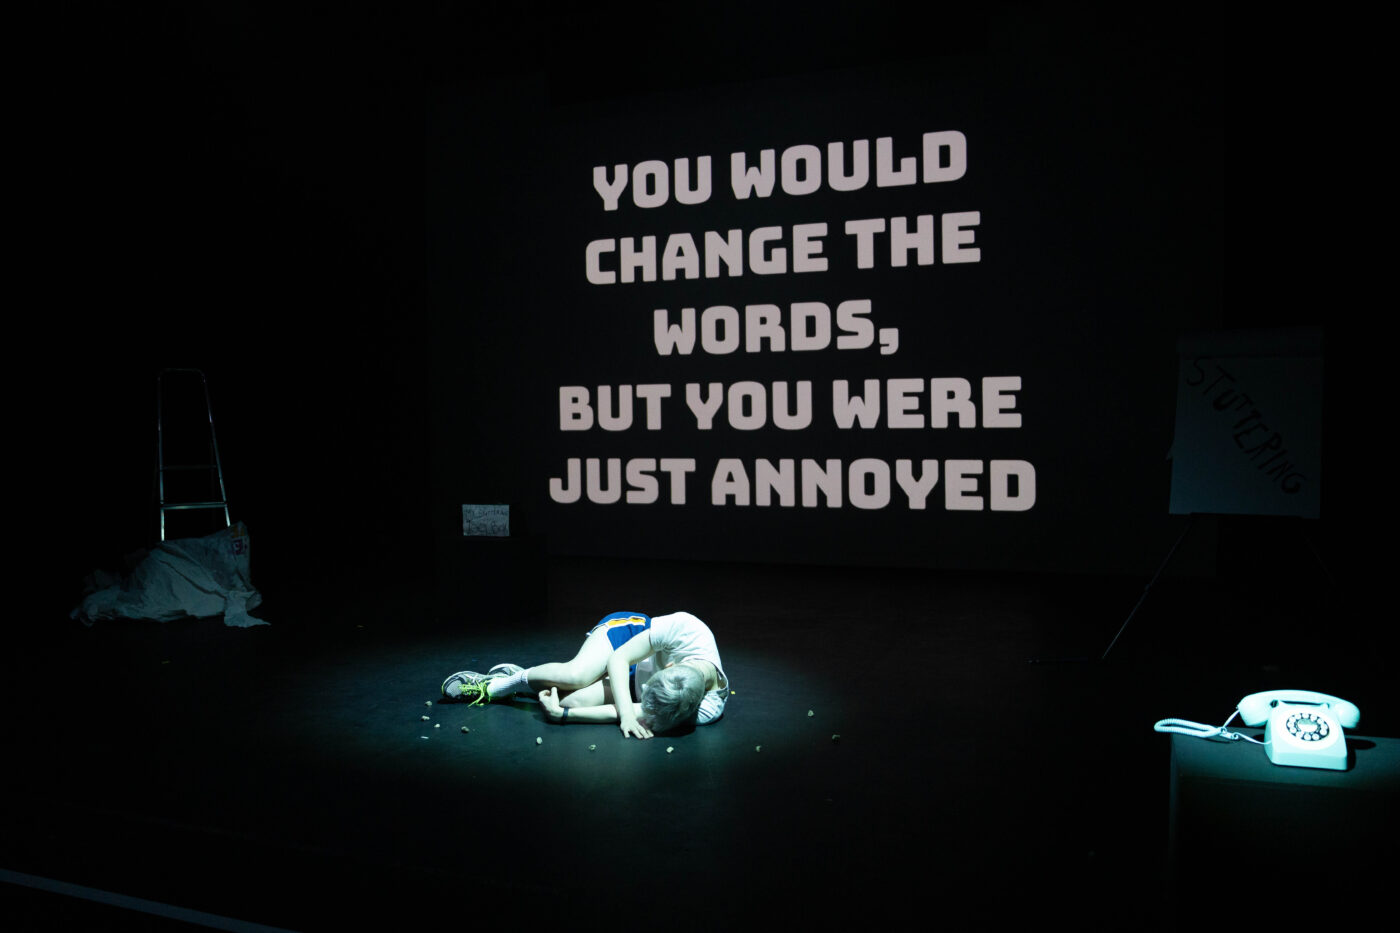 Oli - a white non-binary person - has bleached hair and is dressed in a white tshirt and blue gym shorts. They are curled up on the floor on a stage, surrounded by a circle of pebbles, and bathed in a cold spotlight. Behind them, the words 'you would change the words, but you were just annoyed' are projected onto a large screen. In the foreground, there is an old fashioned phone, also in a pool of cold light.